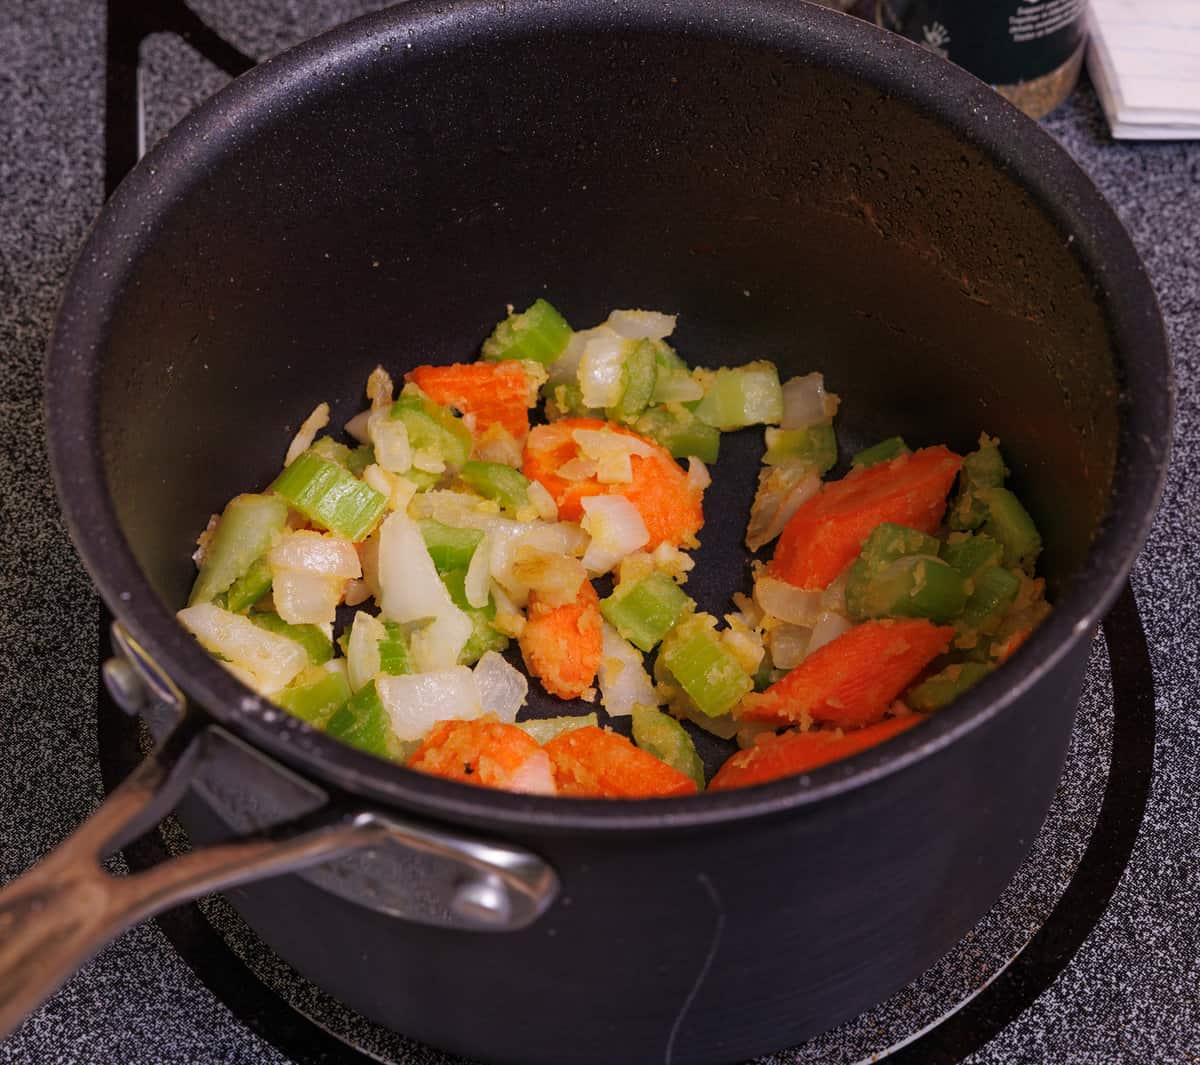 carrots, celery, onions, and garlic cooking in a small saucepan